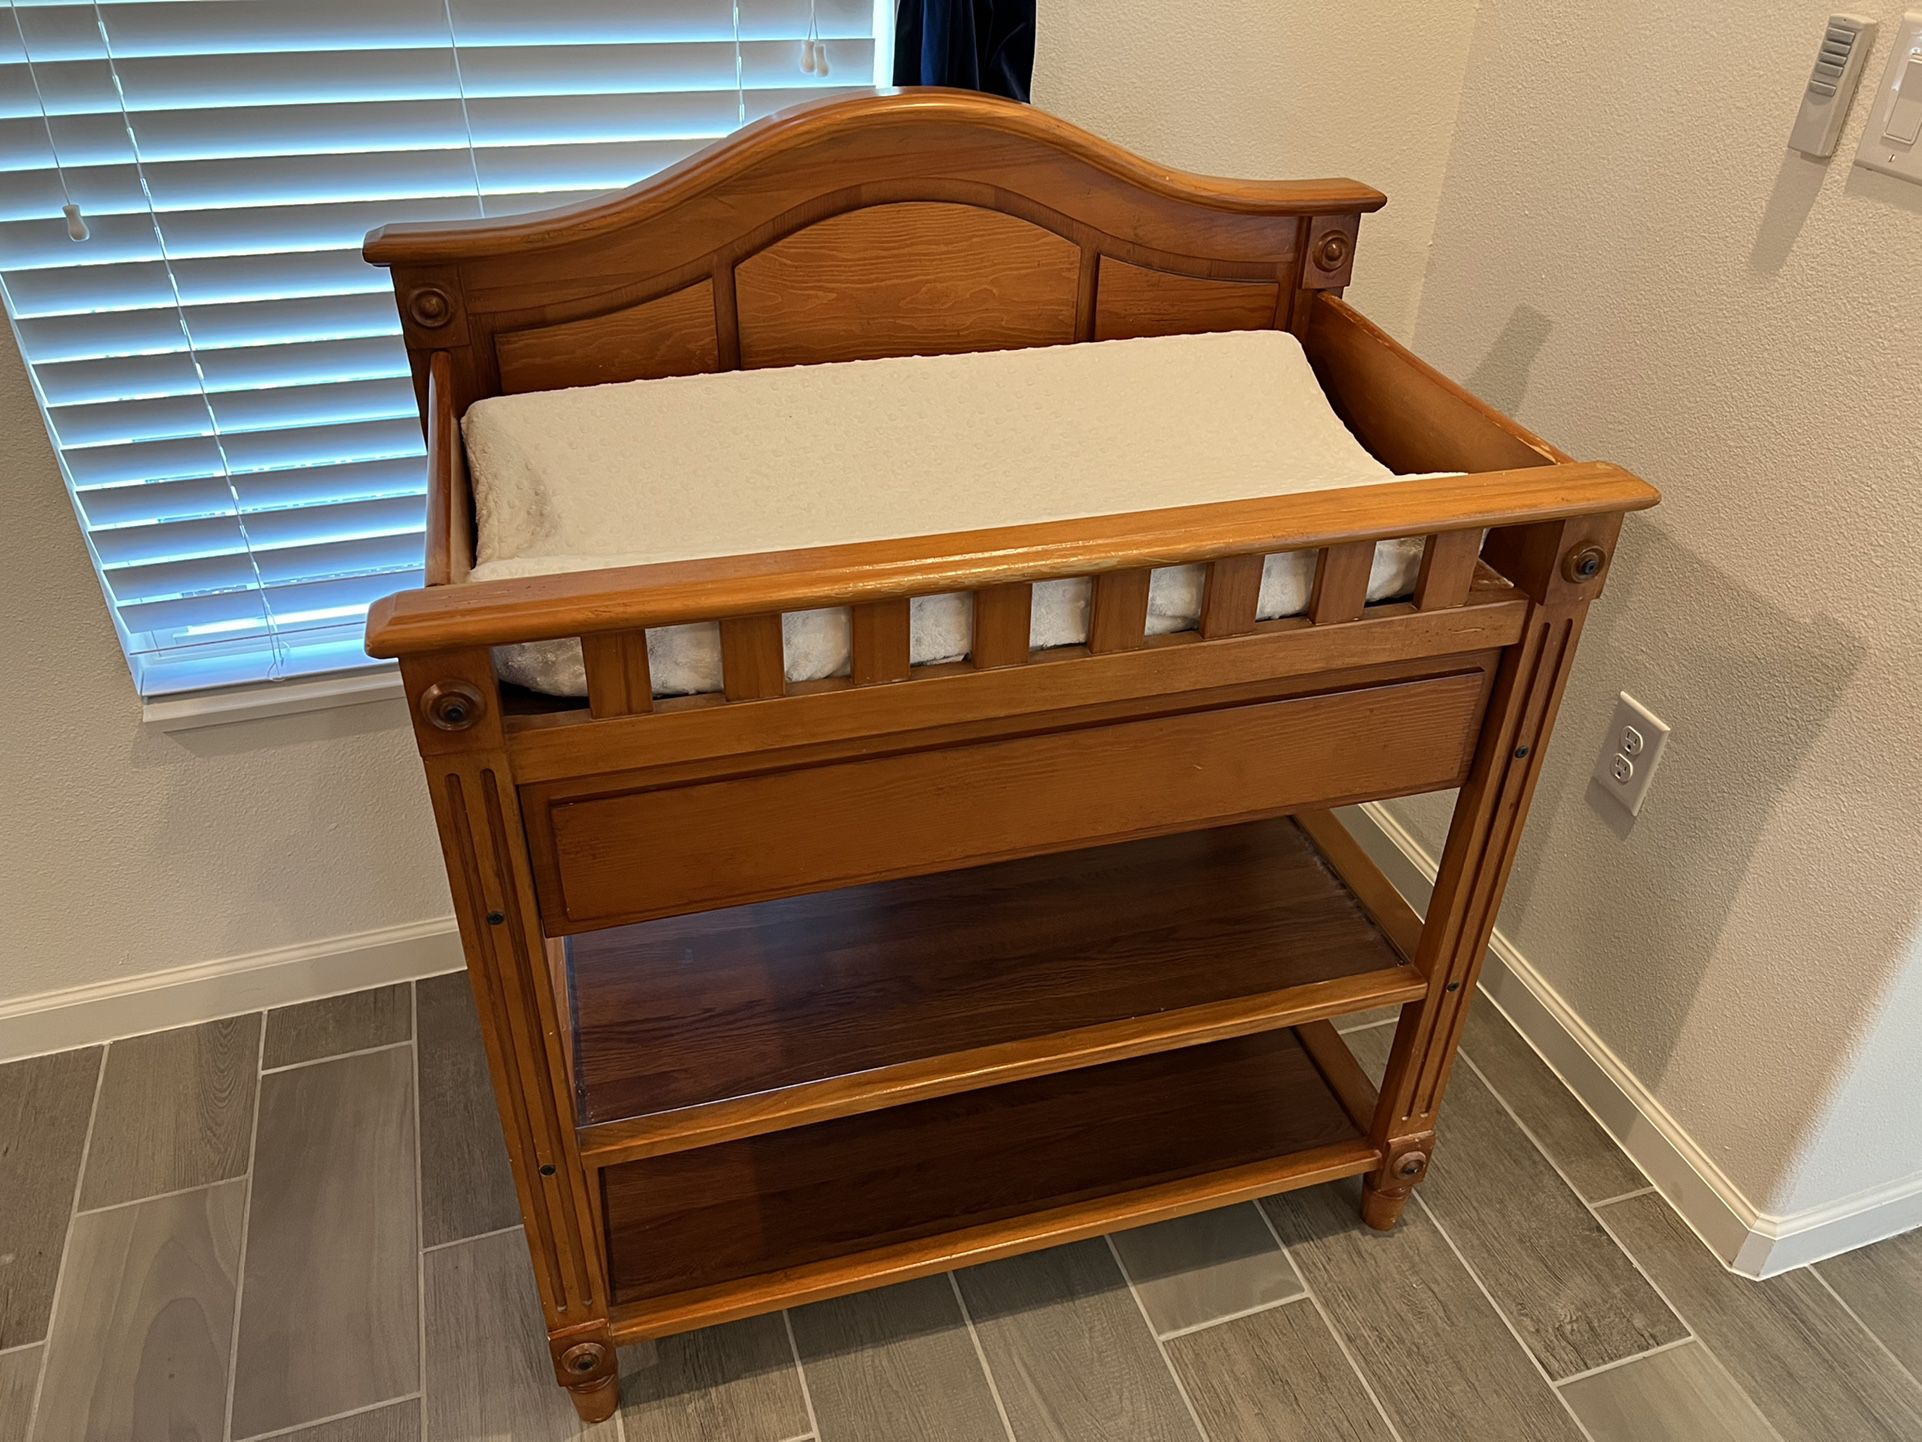 Baby Changing Table - Real wood